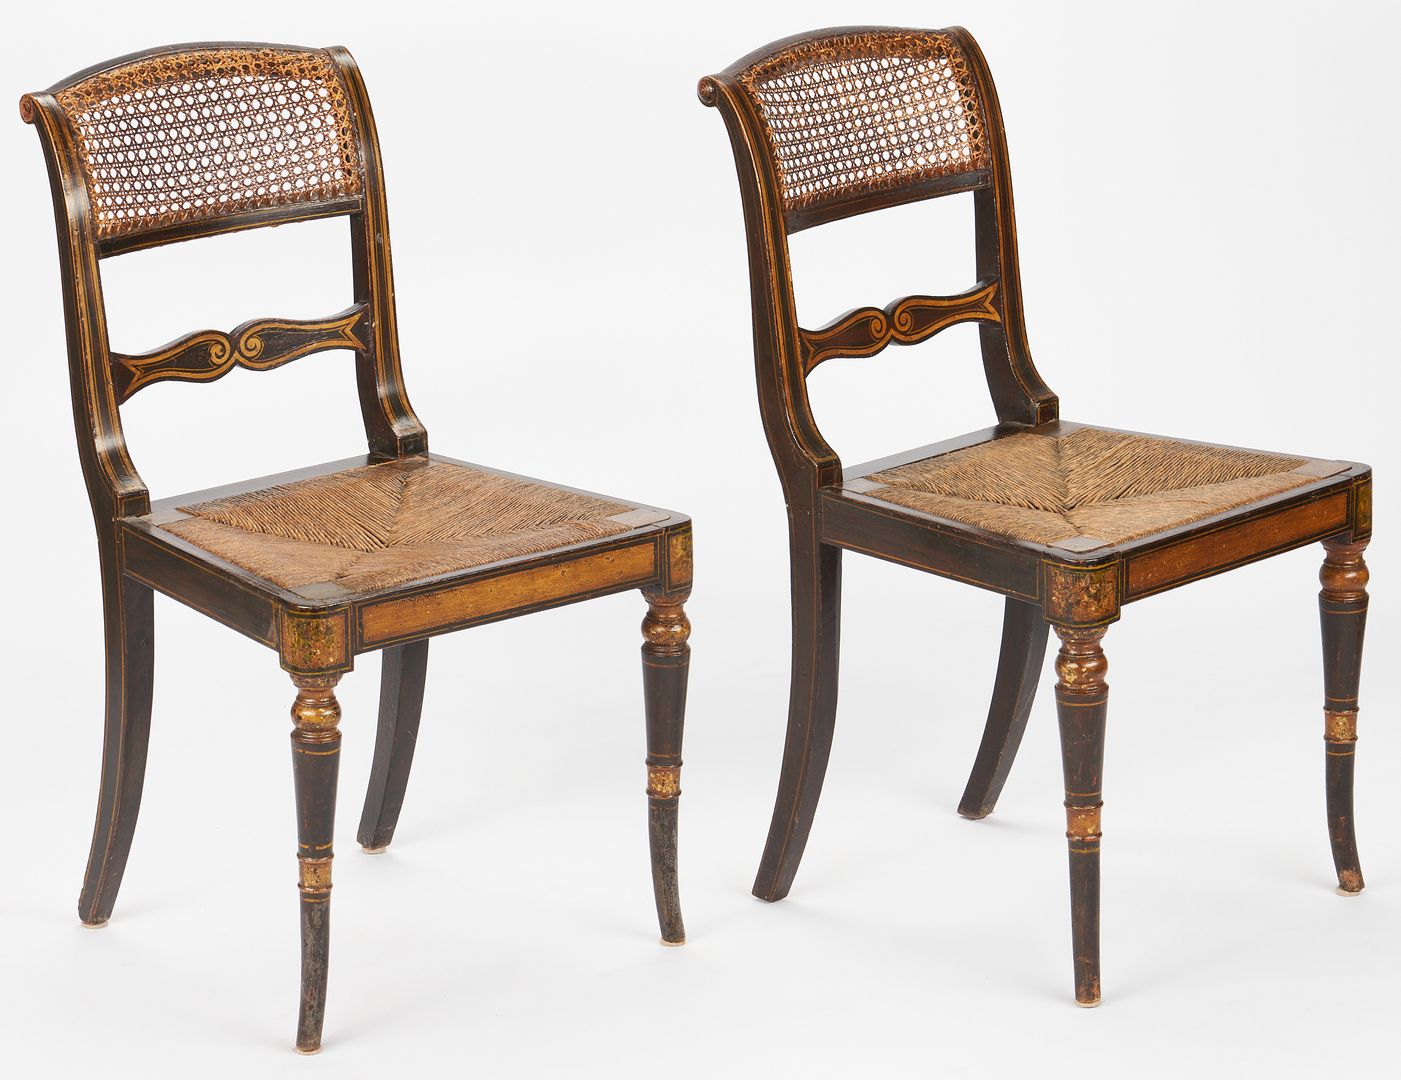 Lot 235: Set of 12 English Regency Paint Decorated Chairs